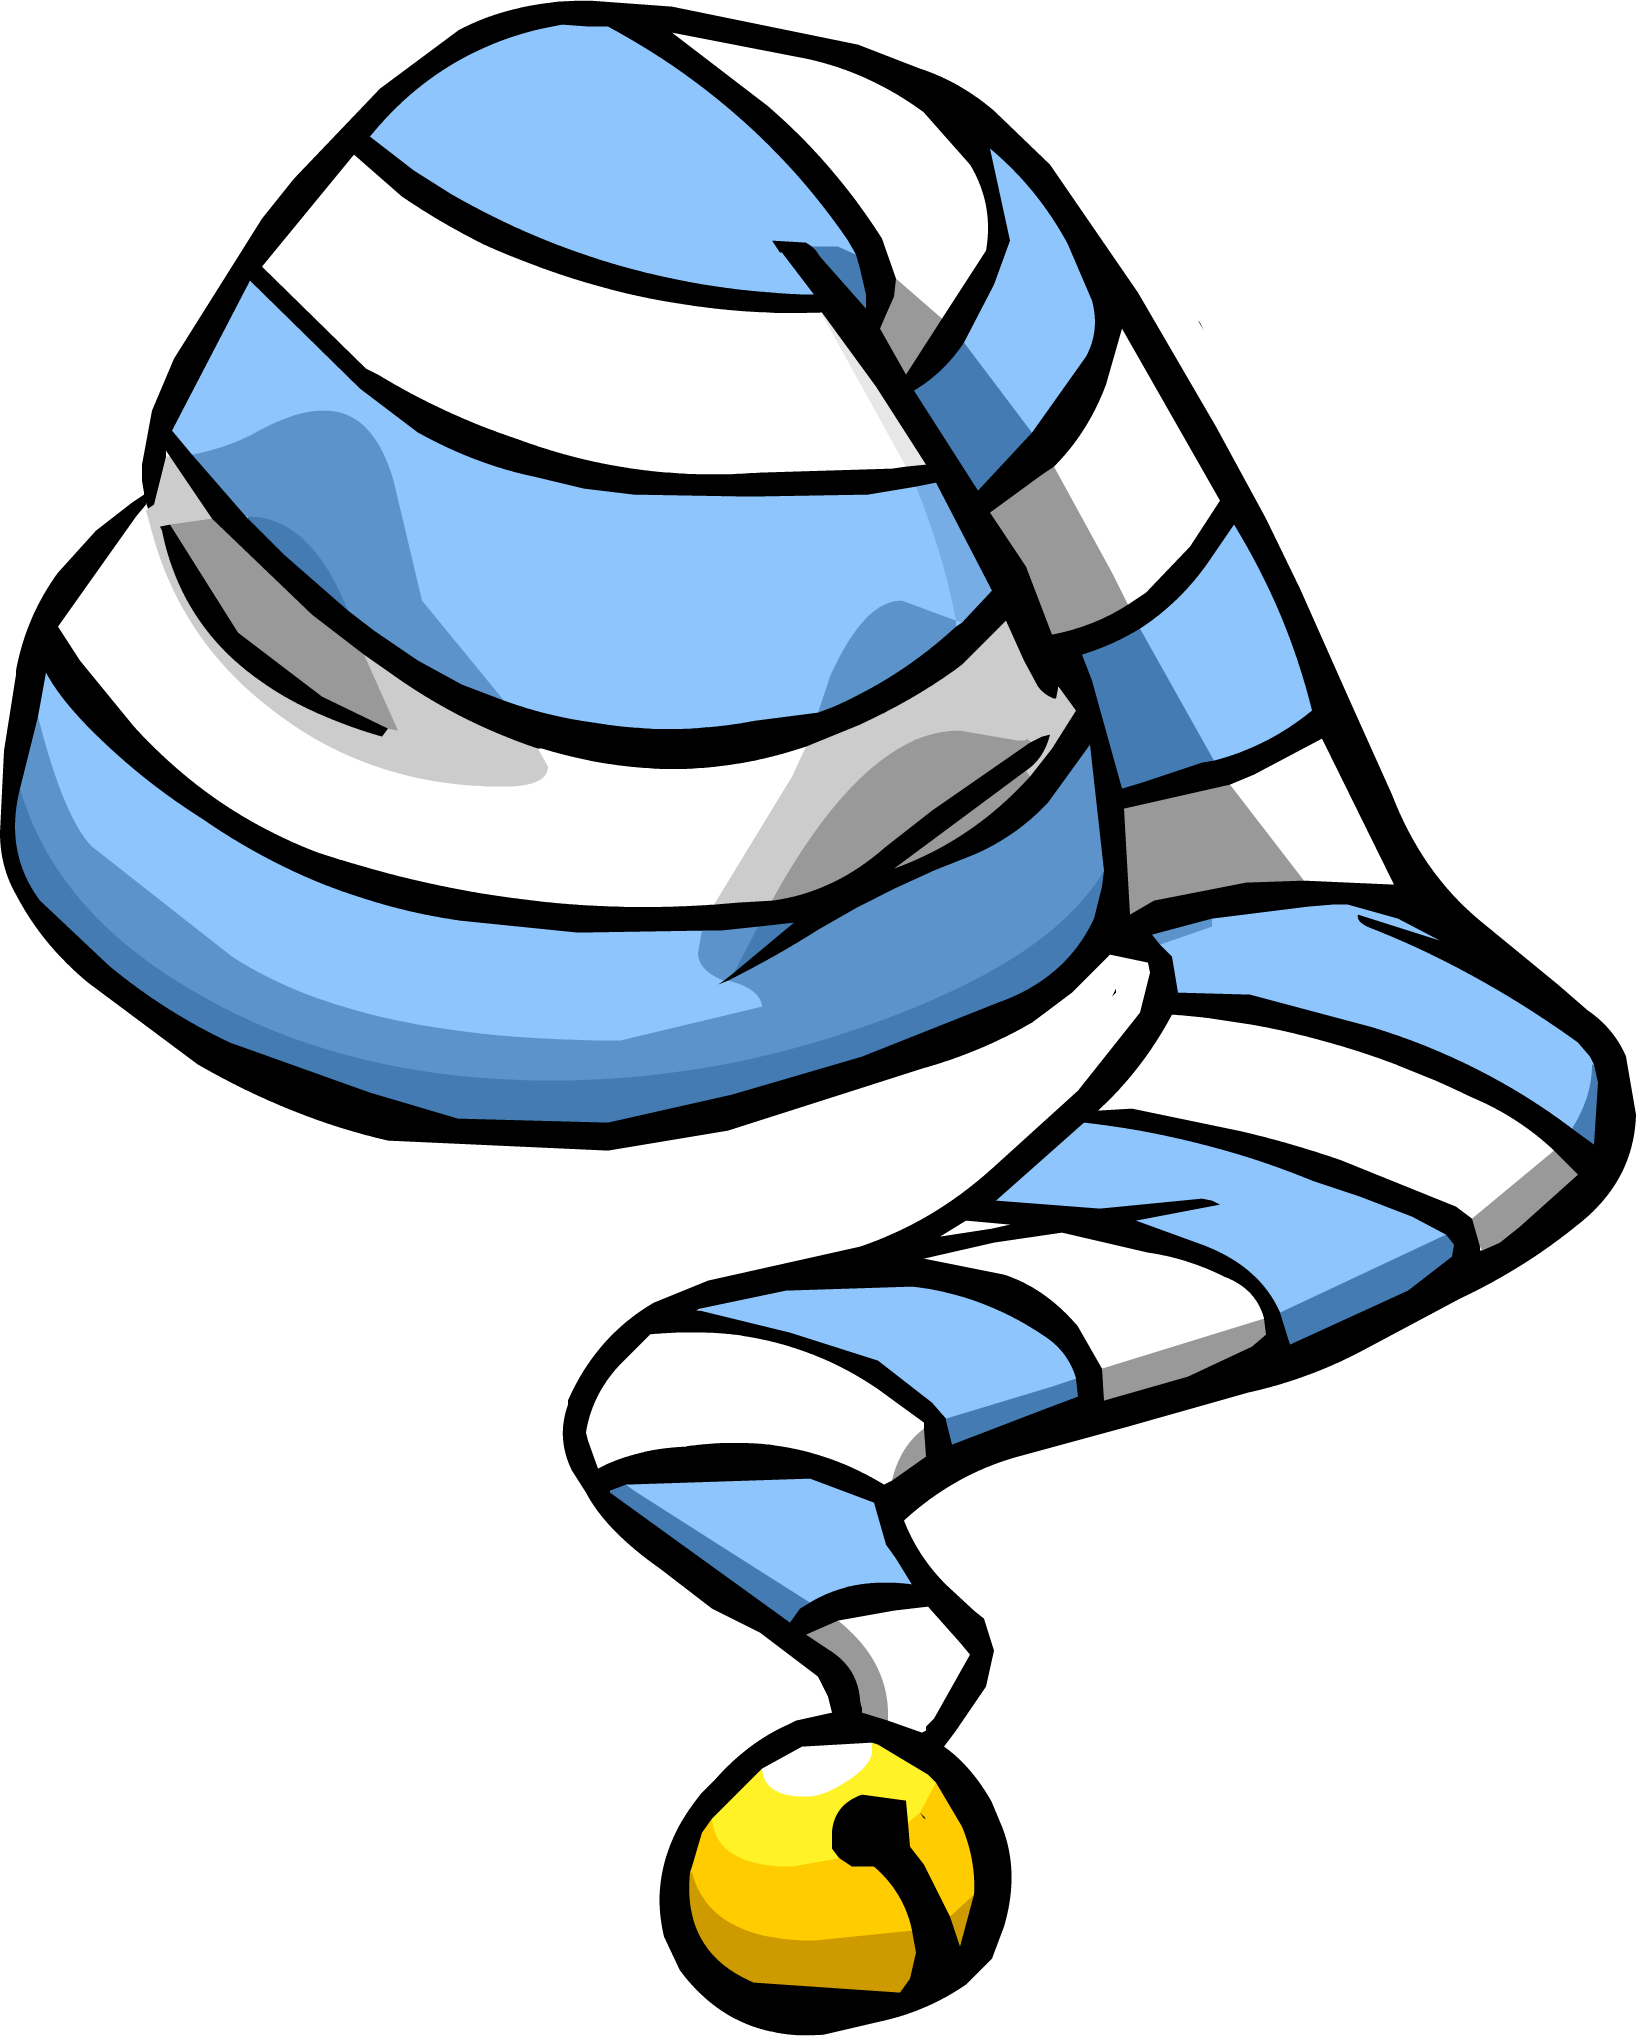 Sleep pencil and in. Clipart hat pajama